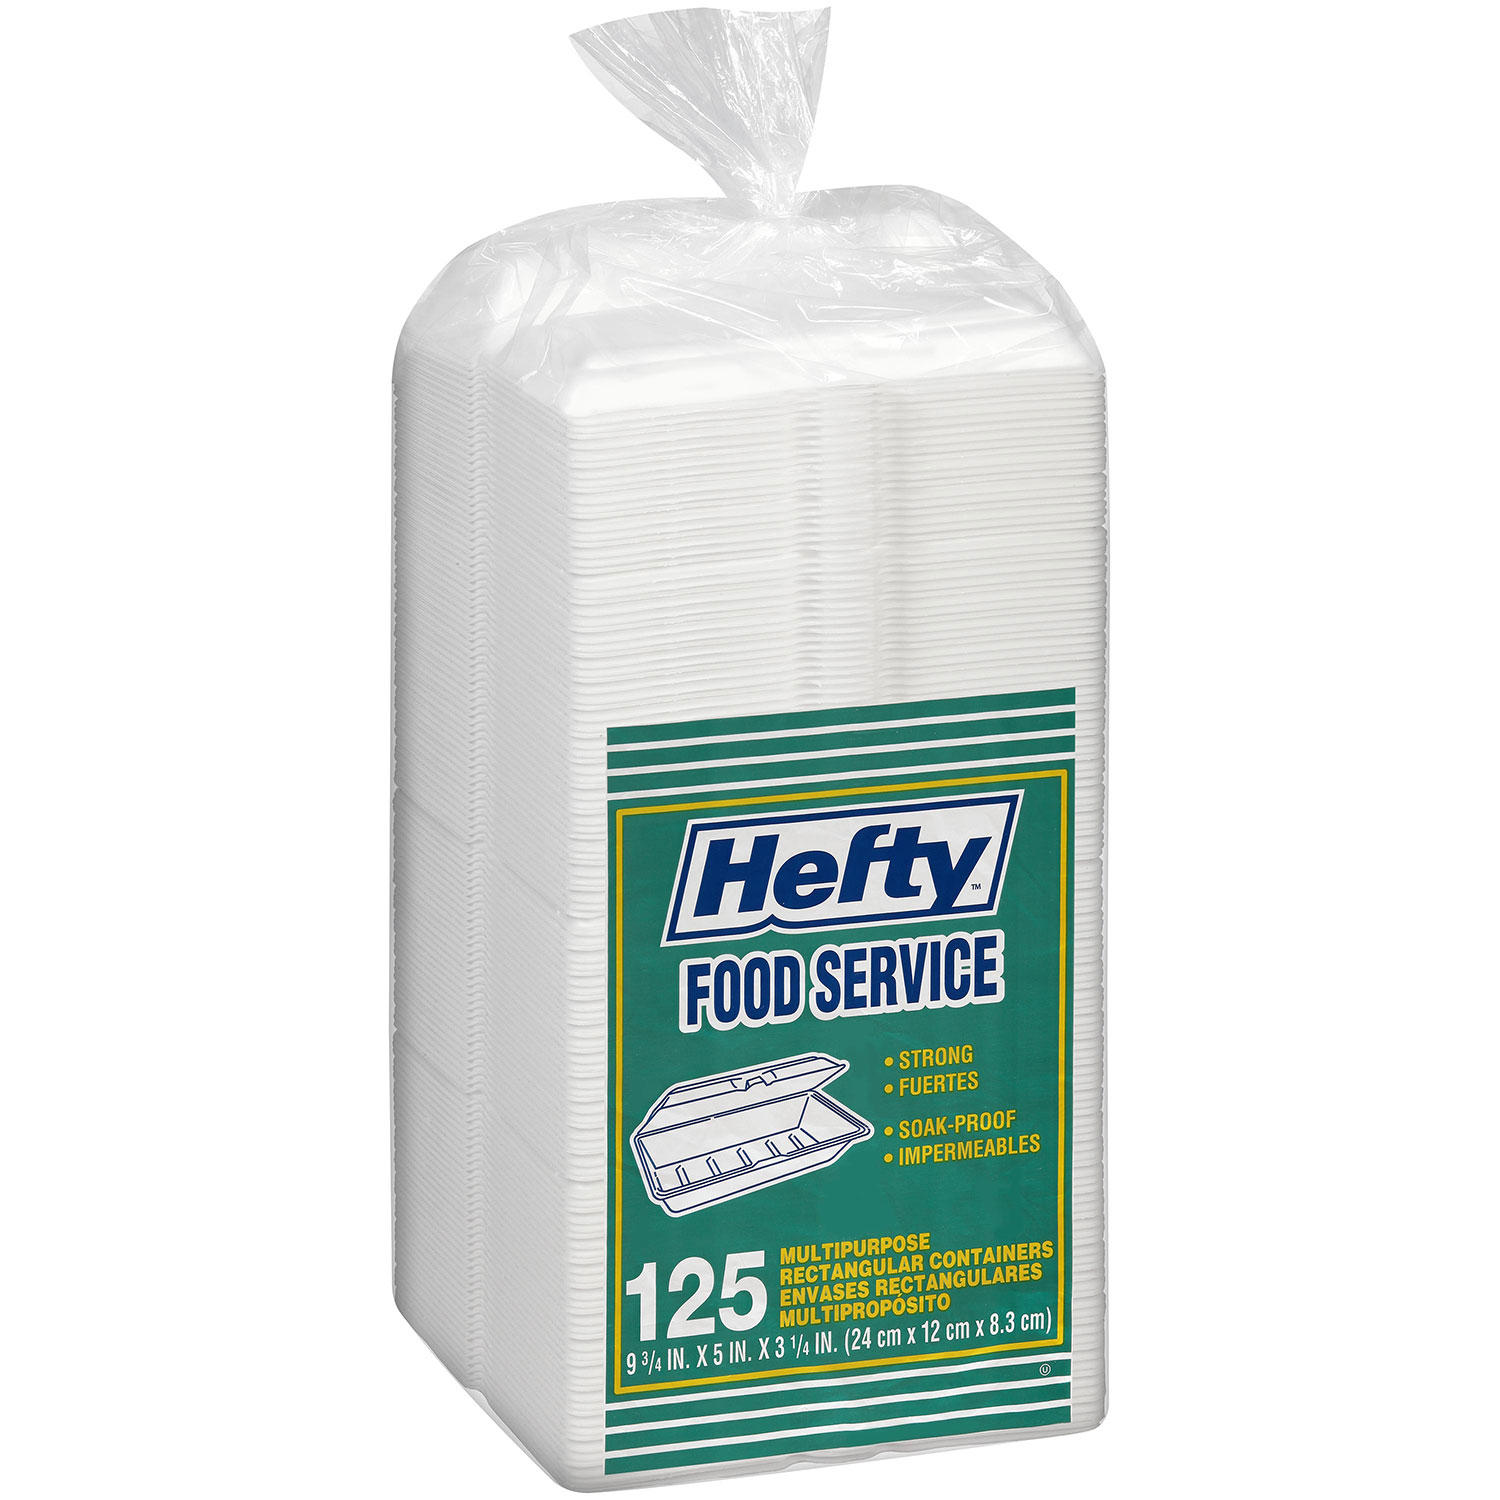 Hefty Food Service Containers Rectangle 9 3/4' x 5' x 3 1/4' (125 ct.)